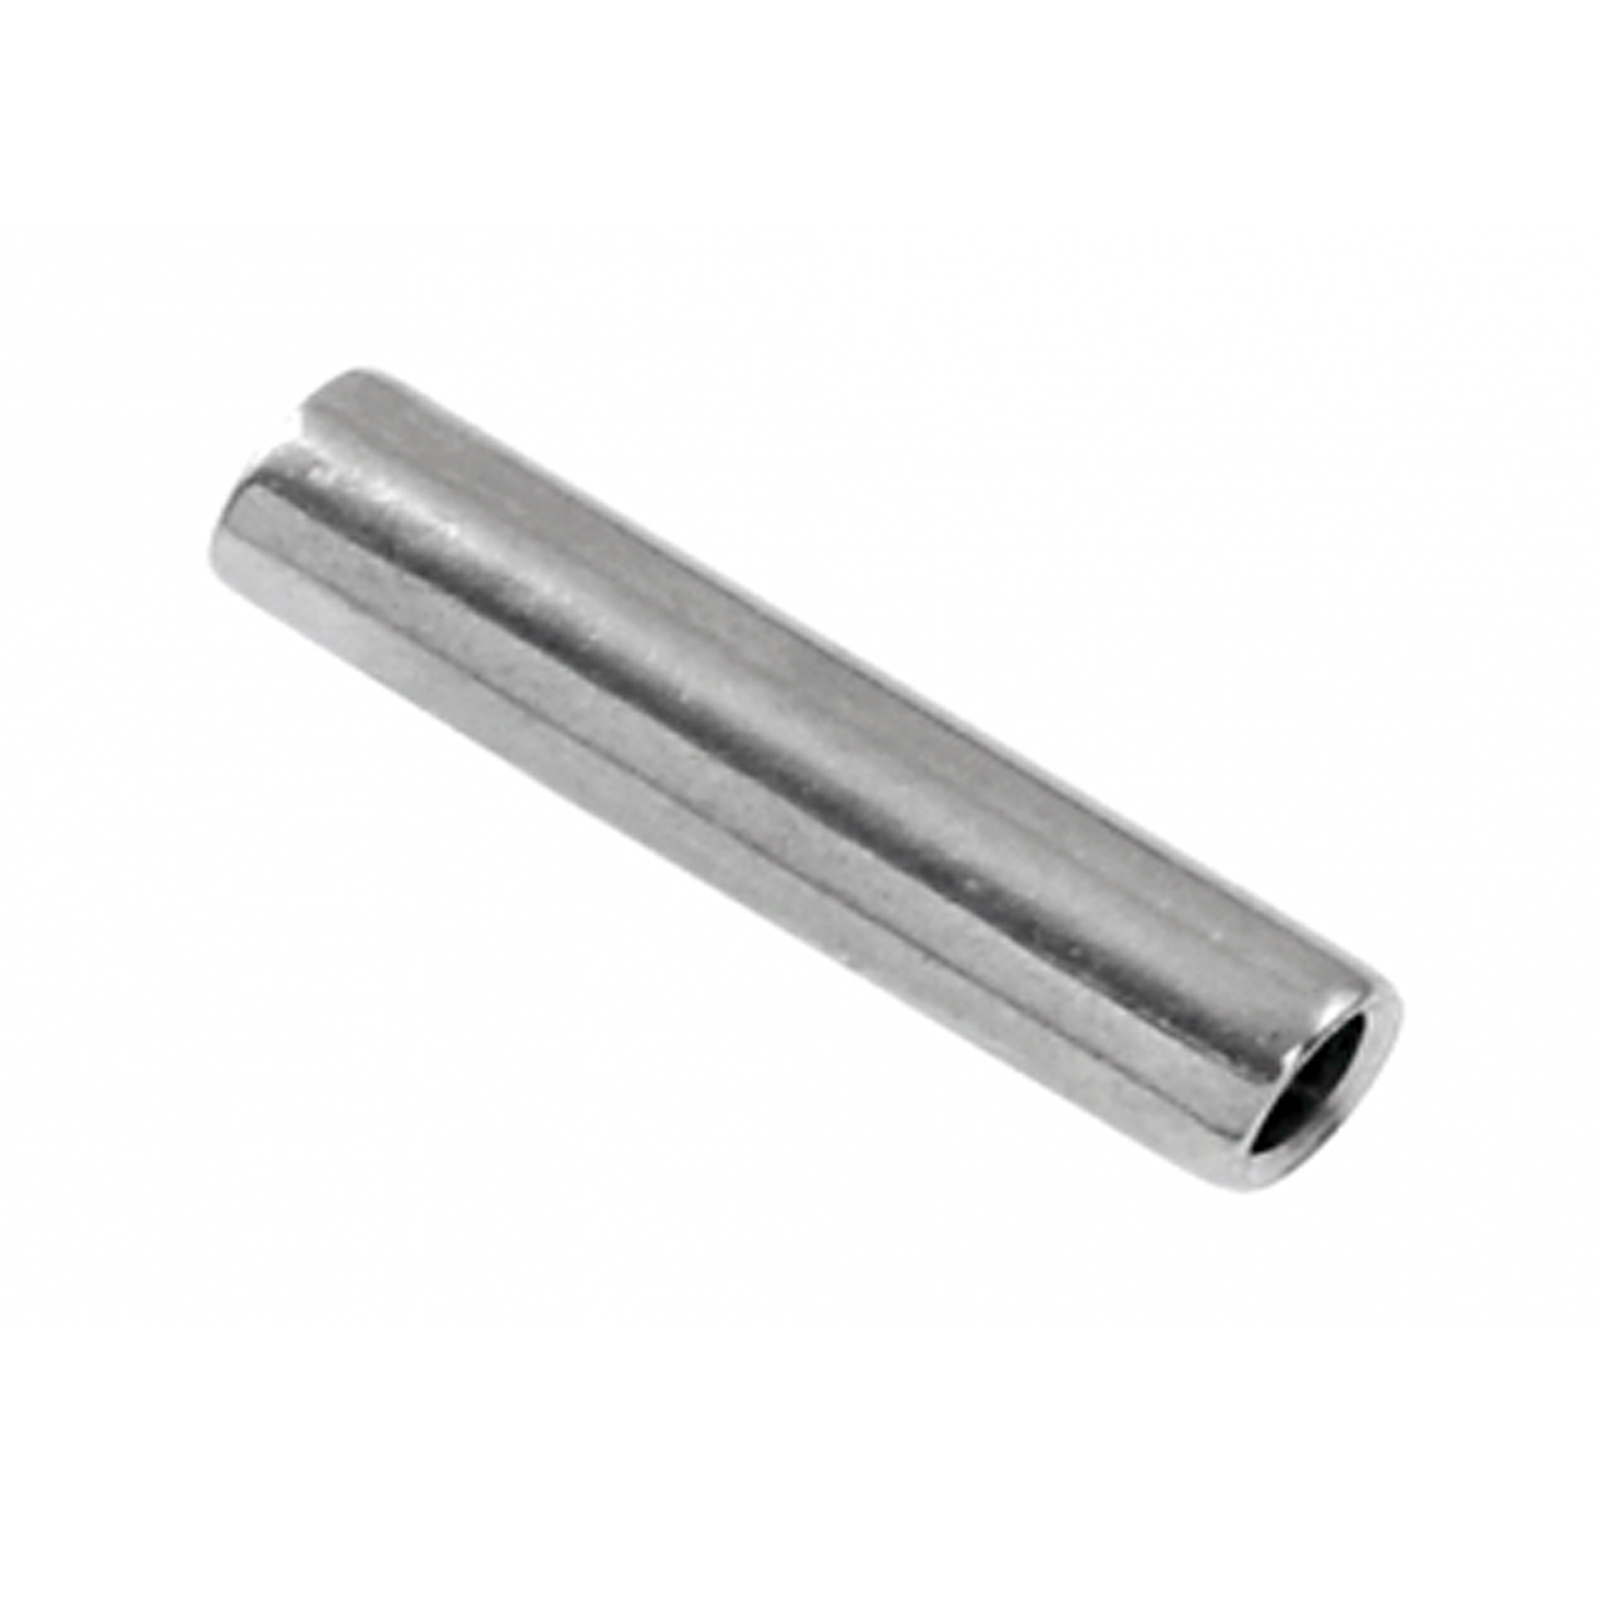 Swage Terminal 5.5mm x 23mm for 3.2mm wire Stainless Steel 316